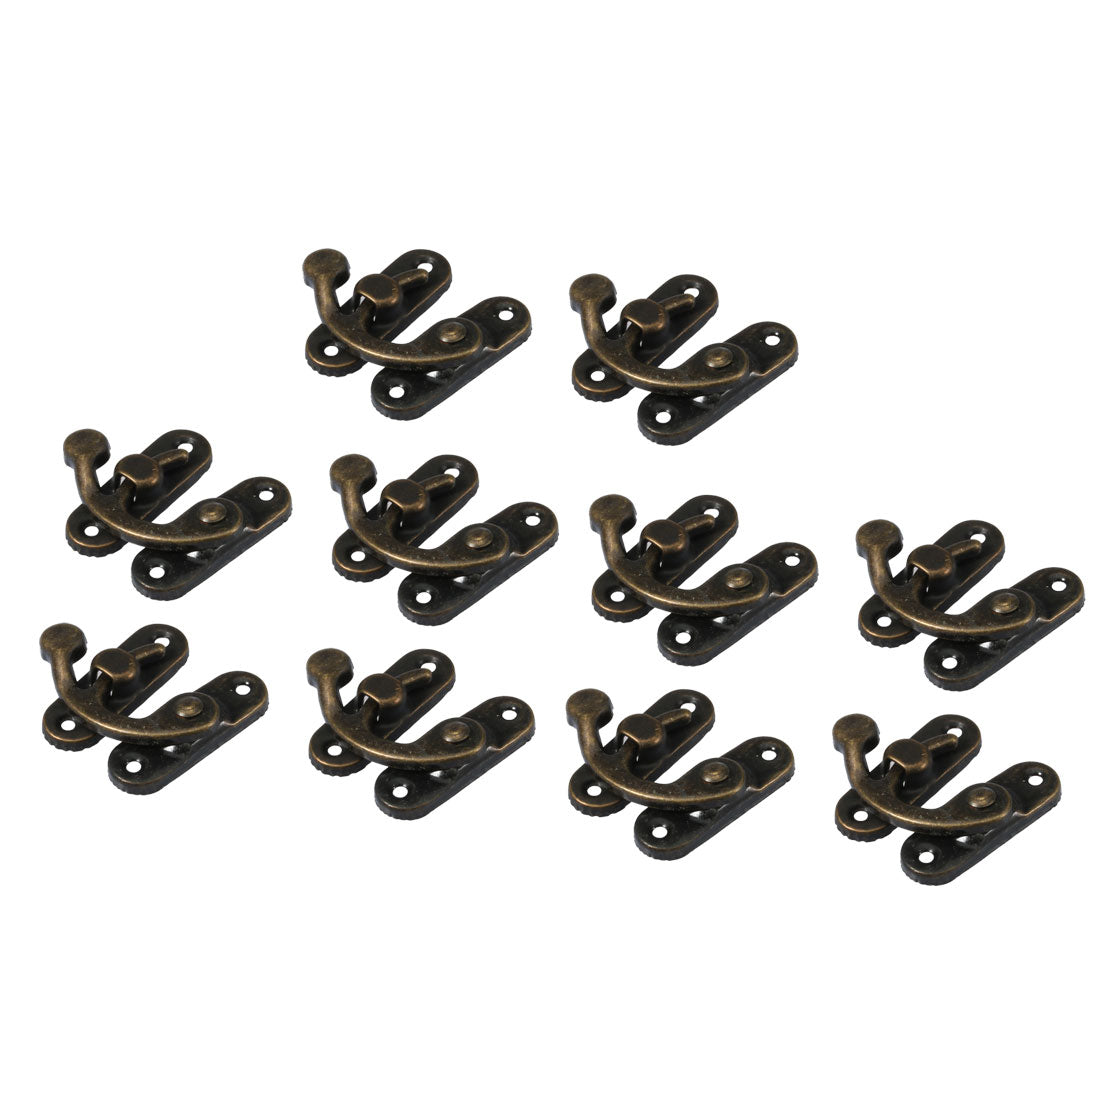 uxcell Uxcell Right Latch Hook Antique Wood Necklace Box Case Catch Hasp Bronze Tone 10 Pcs w Screws